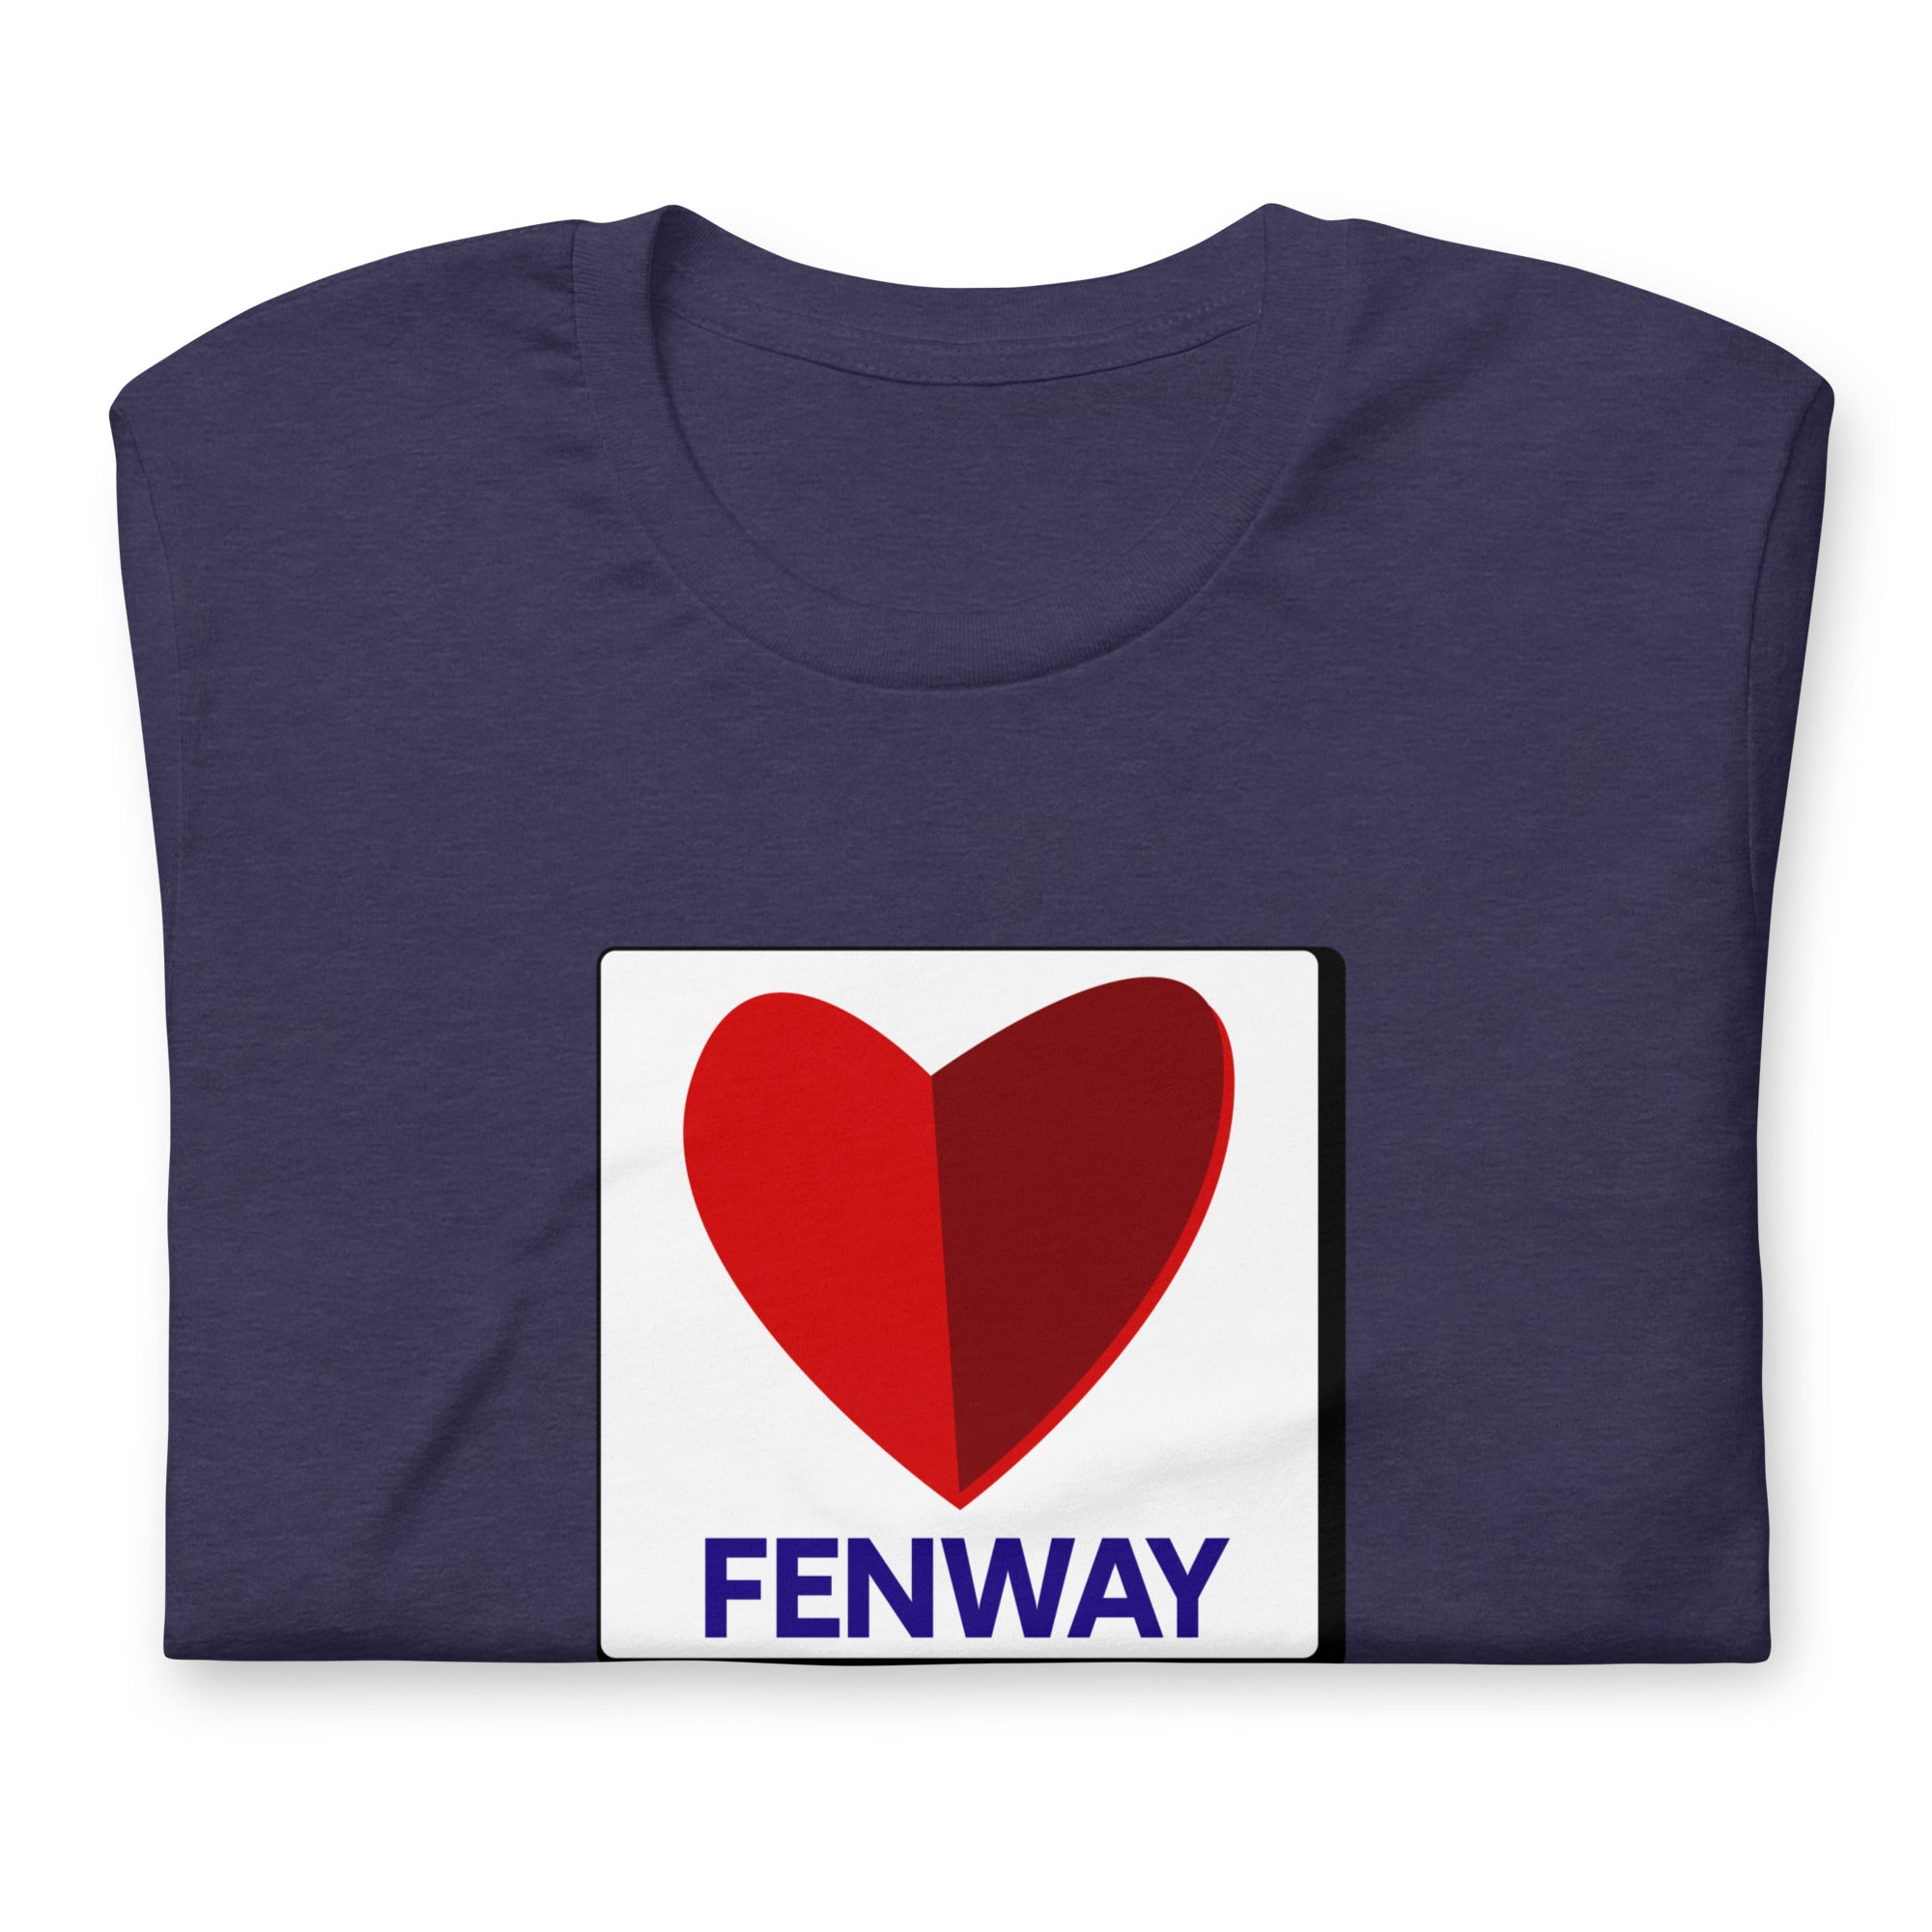 photo of navy blue t-shirt with graphic of the citgo sign boston fenway as a heart on navy unisex tshirt